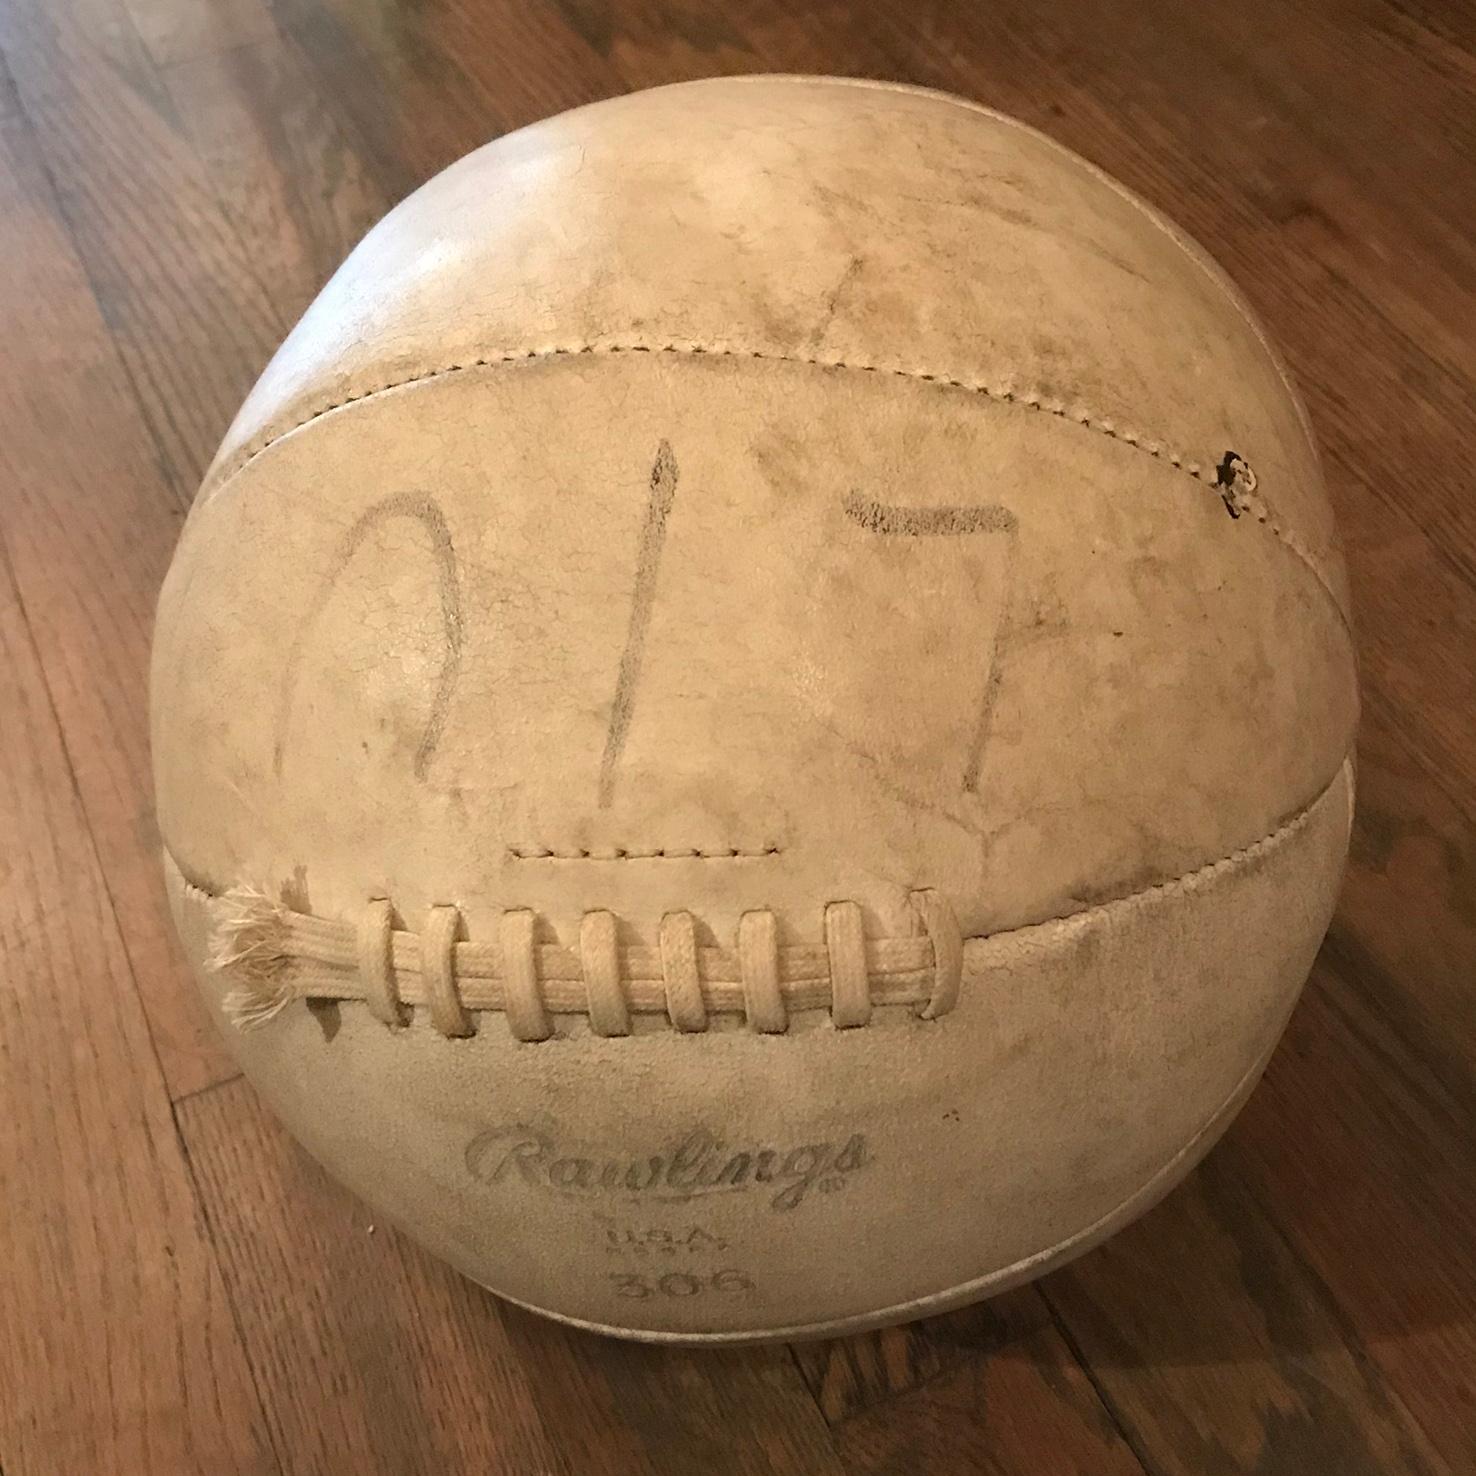 20th Century Vintage Rawlings White Leather Medicine Ball